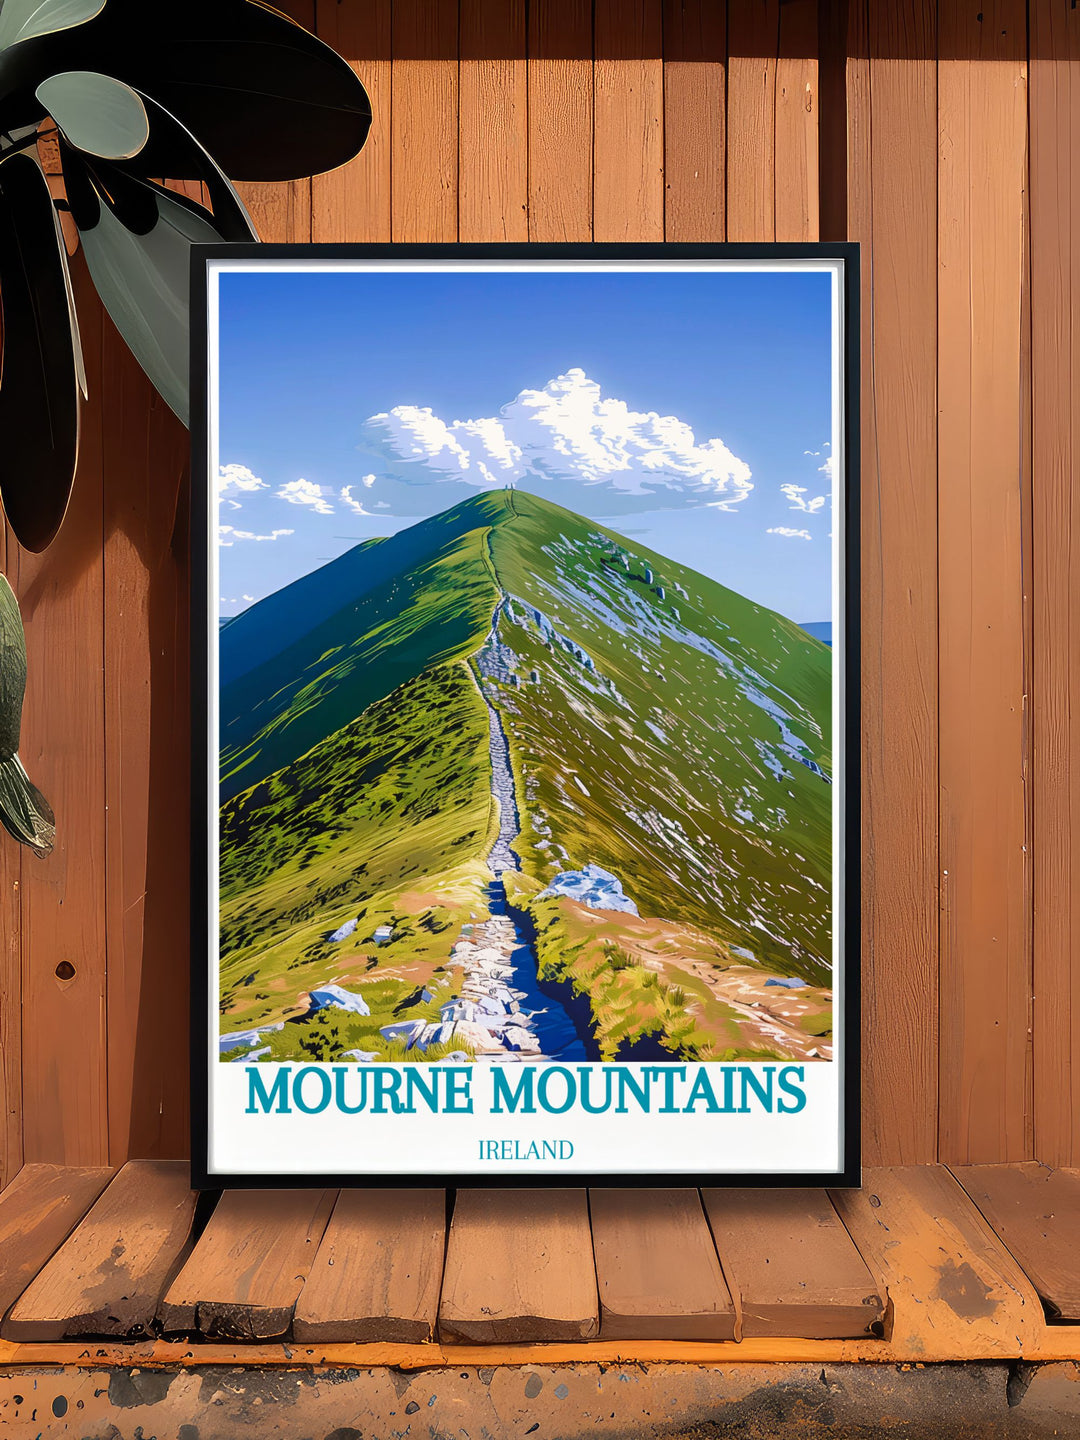 Featuring the iconic peaks and lush valleys of the Mourne Mountains, this poster showcases the regions inviting landscapes, perfect for those who cherish natural and scenic destinations.